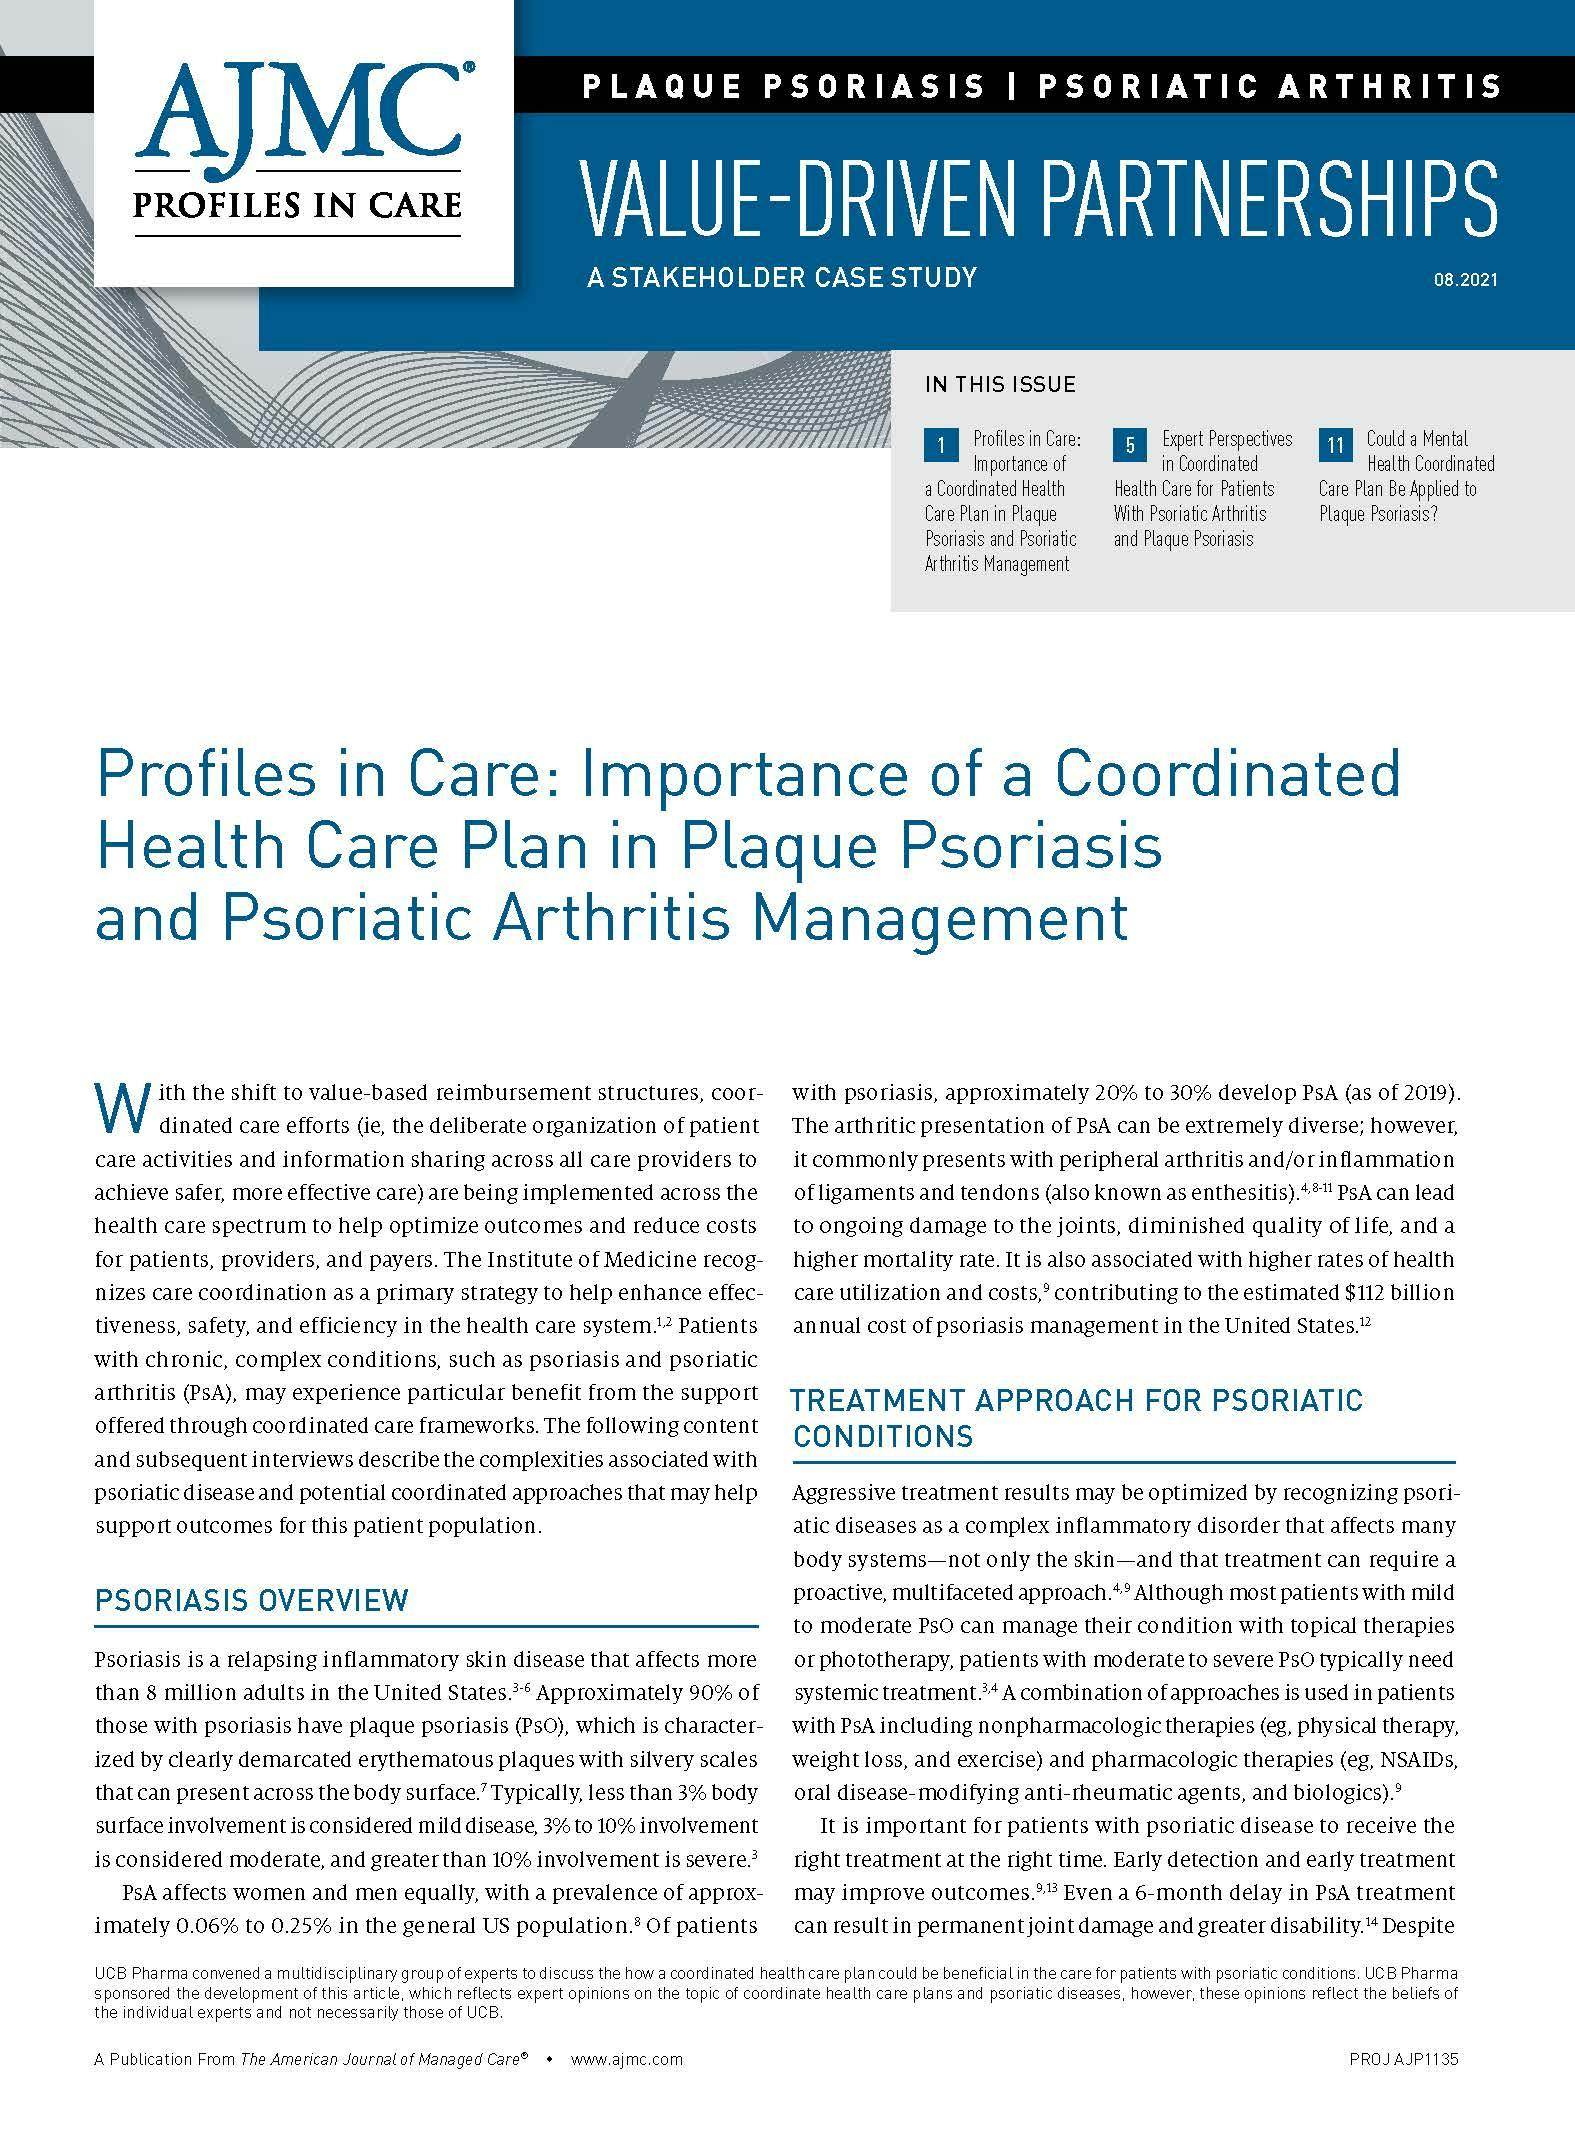 Profiles in Care: Importance of a Coordinated Health Care Plan in Plaque Psoriasis and Psoriatic Arthritis Management